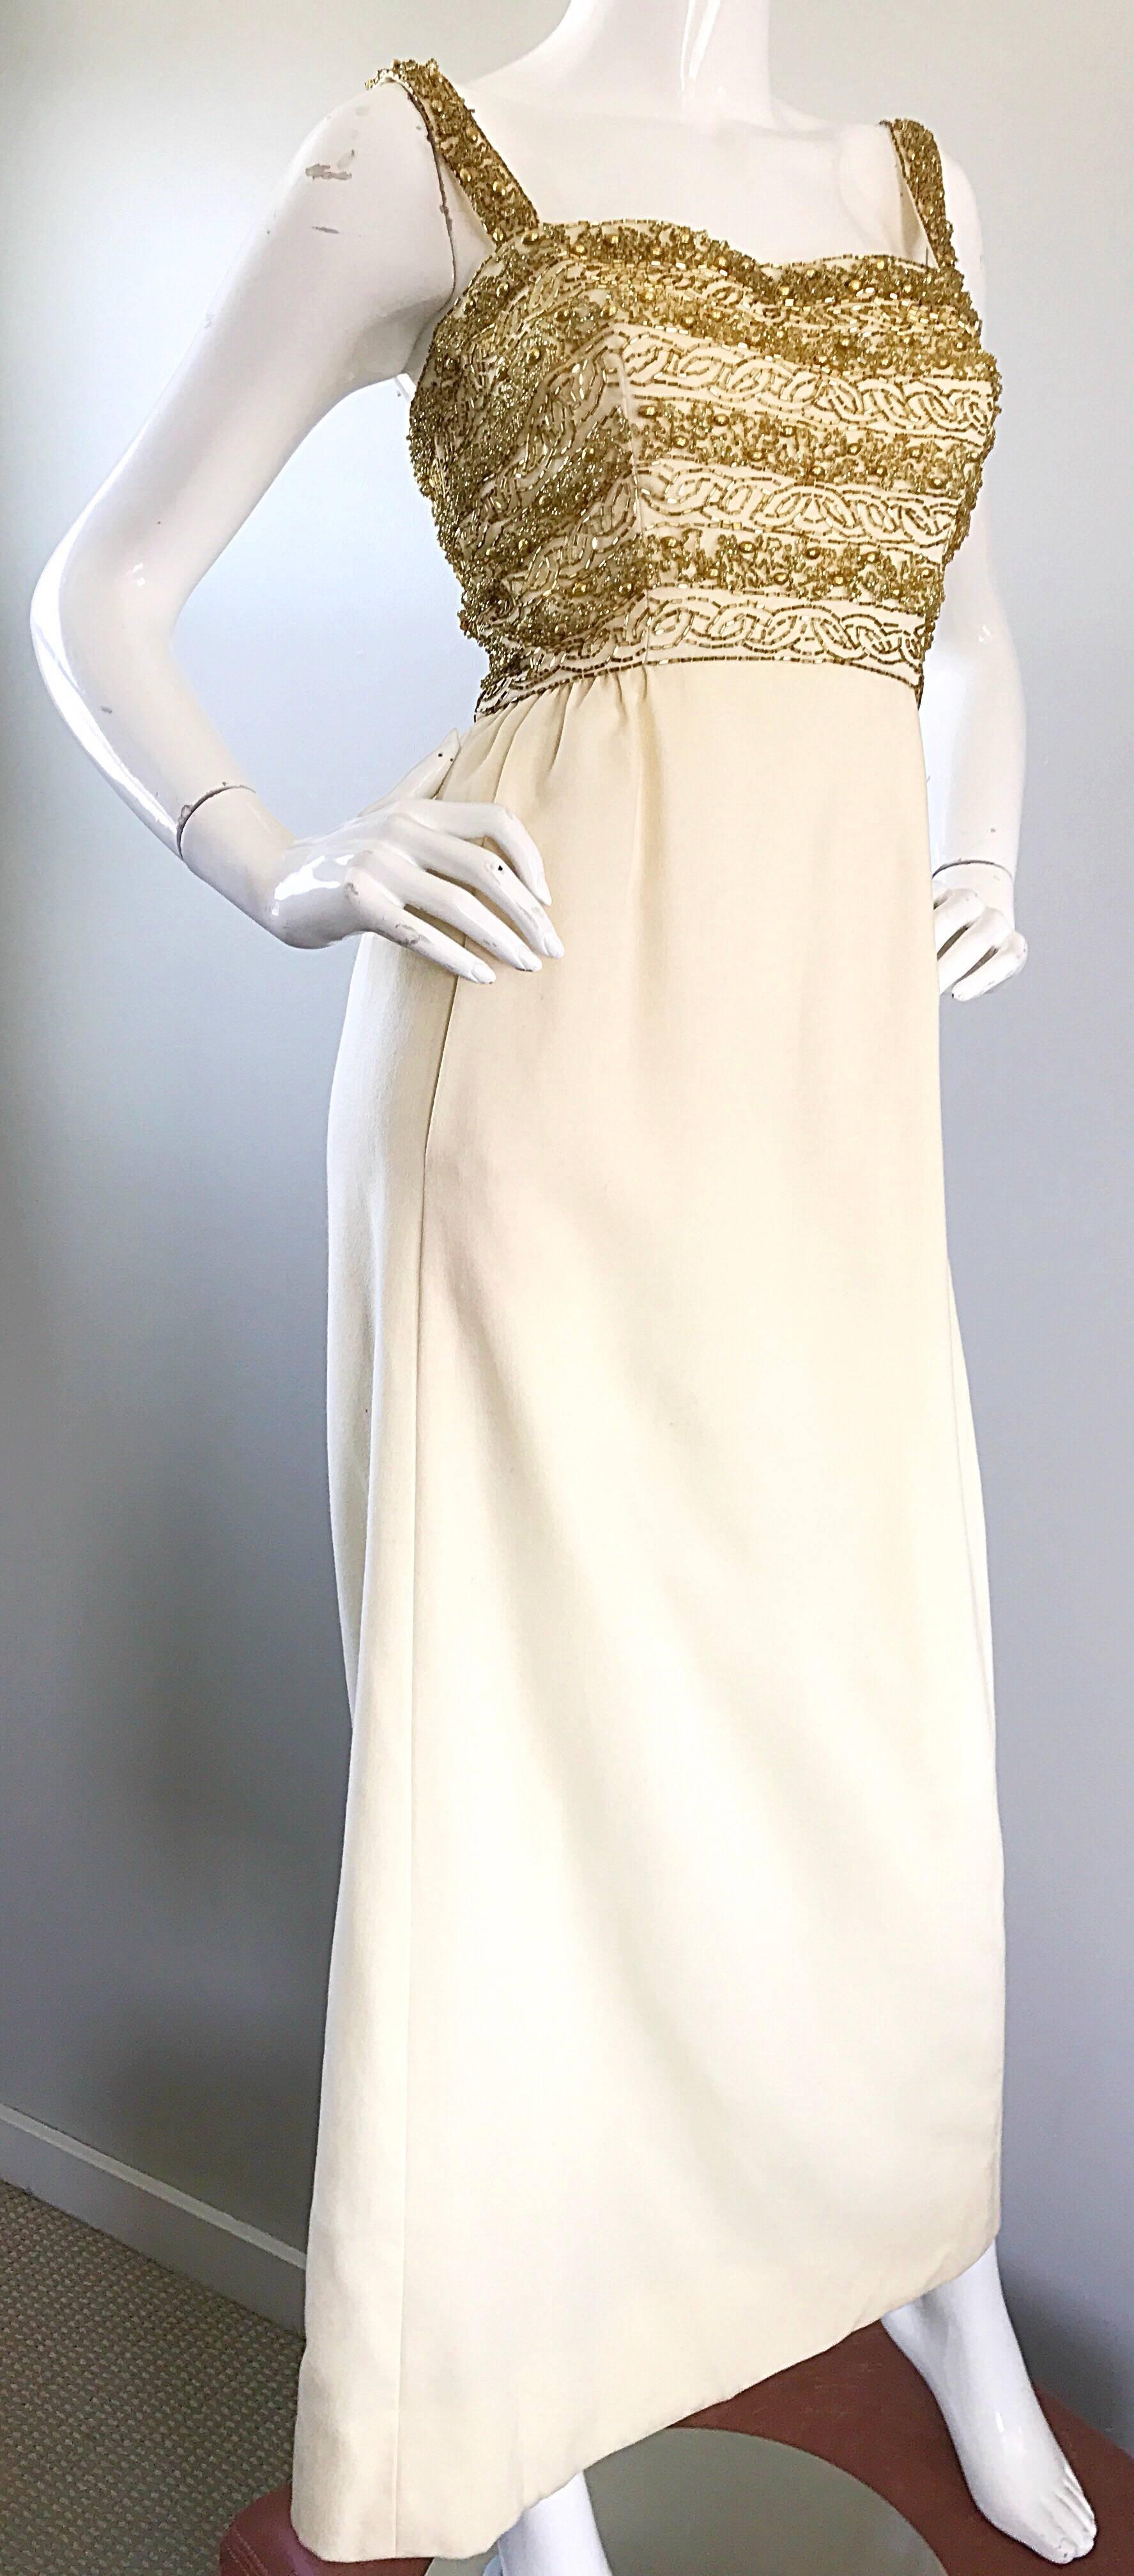 Women's Gorgeous 1960s Joseph Magnin Ivory + Gold Beaded Vintage 60s Wool Evening Gown